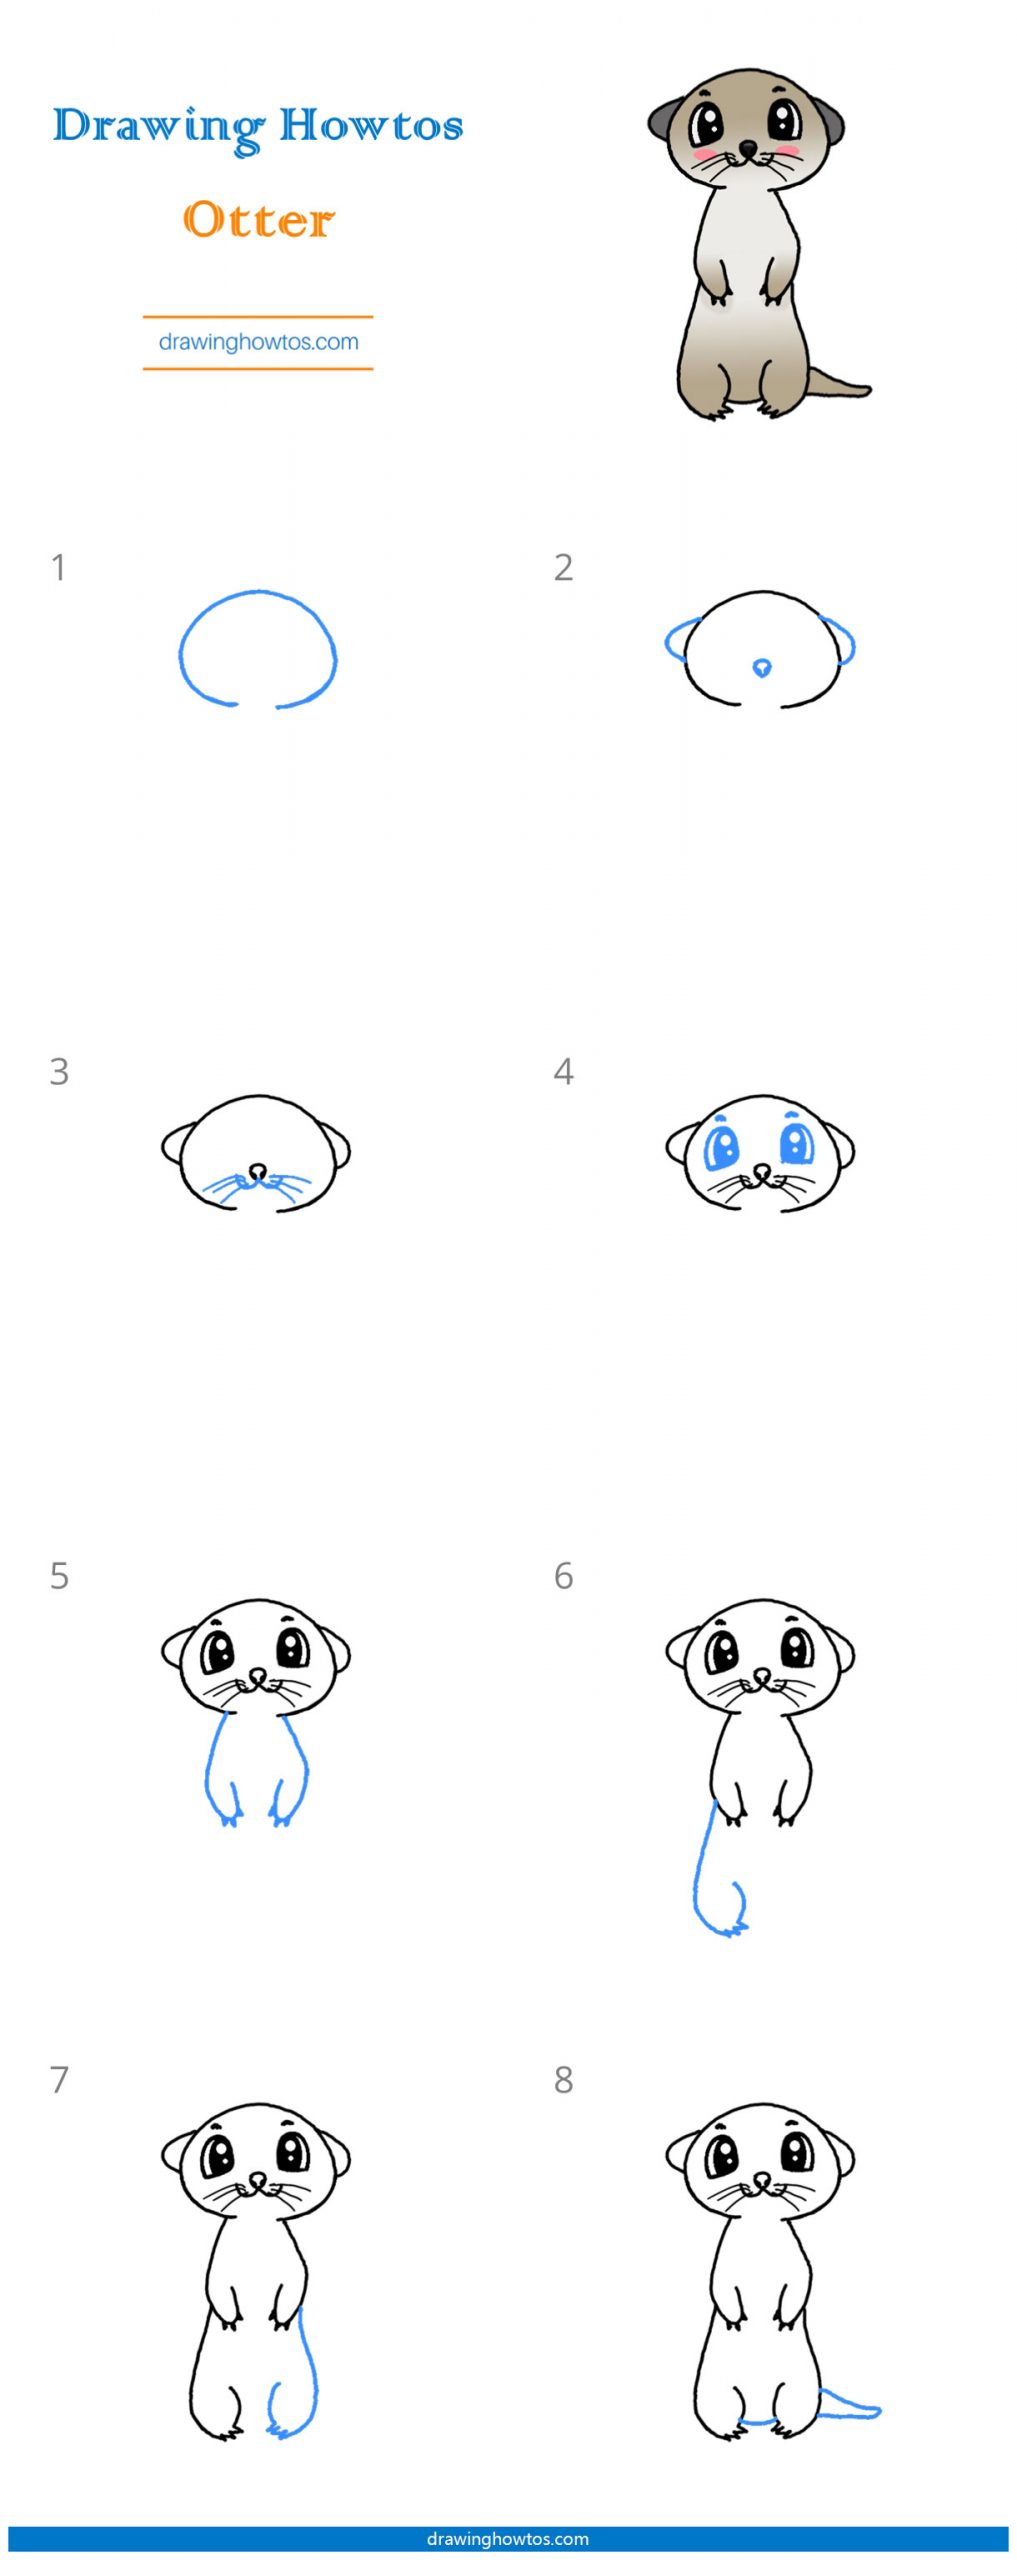 How to Draw an Otter - Step by Step Easy Drawing Guides - Drawing Howtos